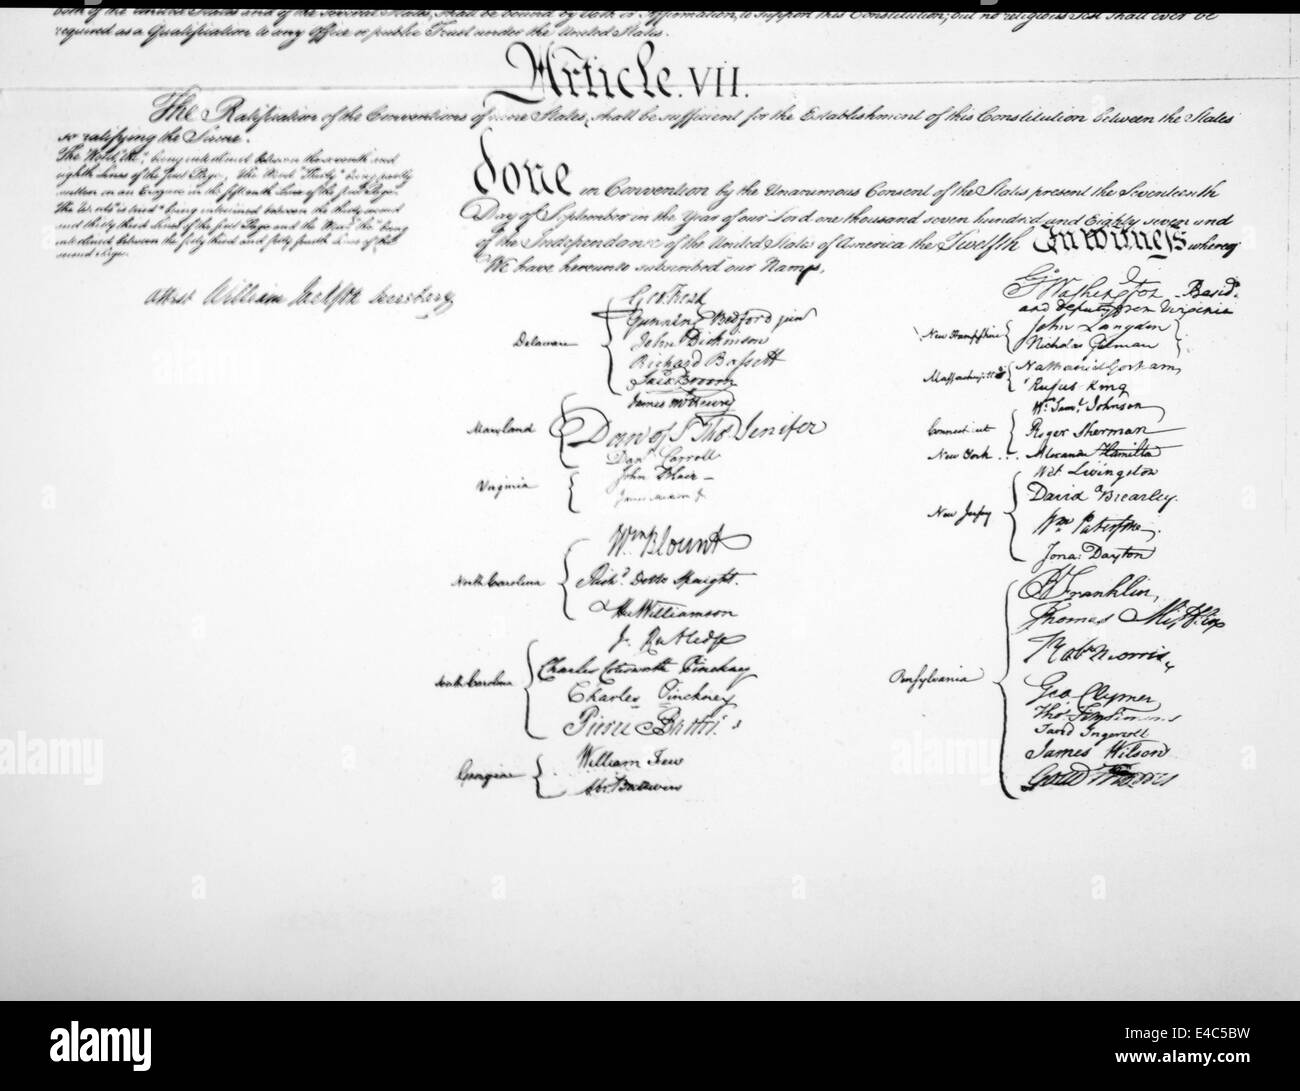 United States Constitution, Lower Half of Signature Page, 1787 Stock Photo